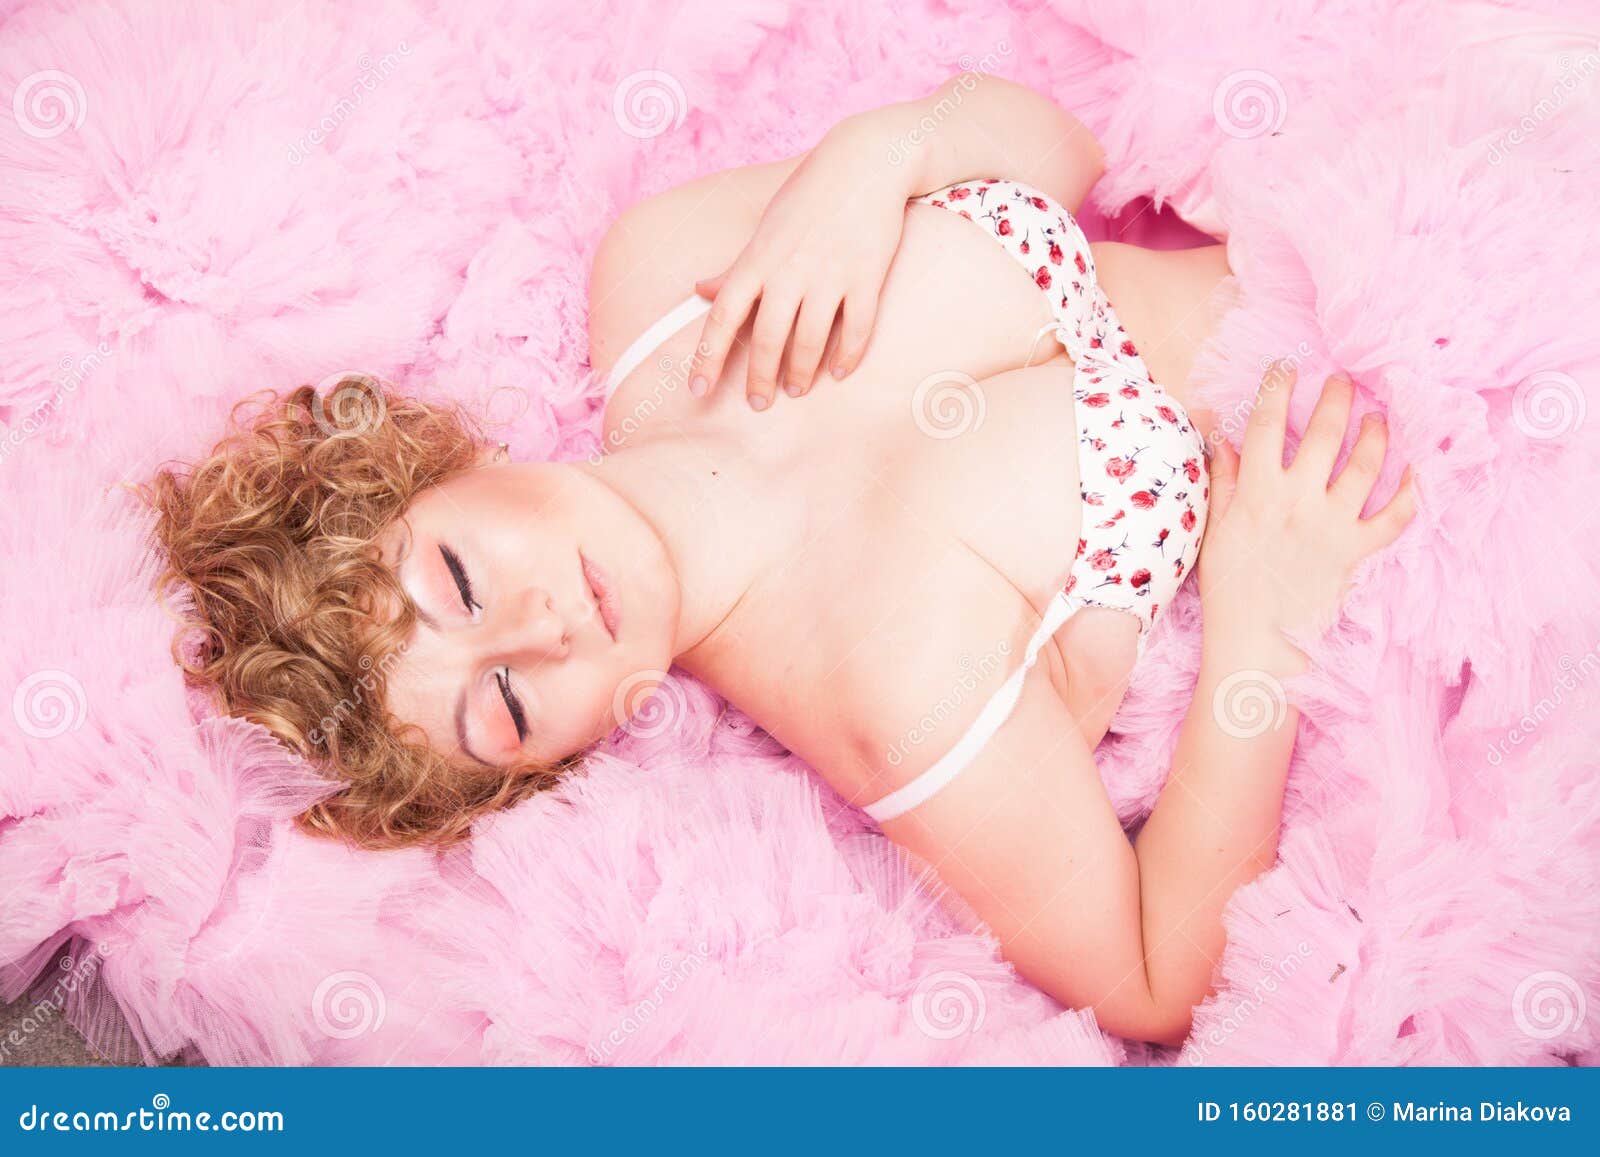 White Bra Lying On The Aged Boards Stock Photo, Picture and